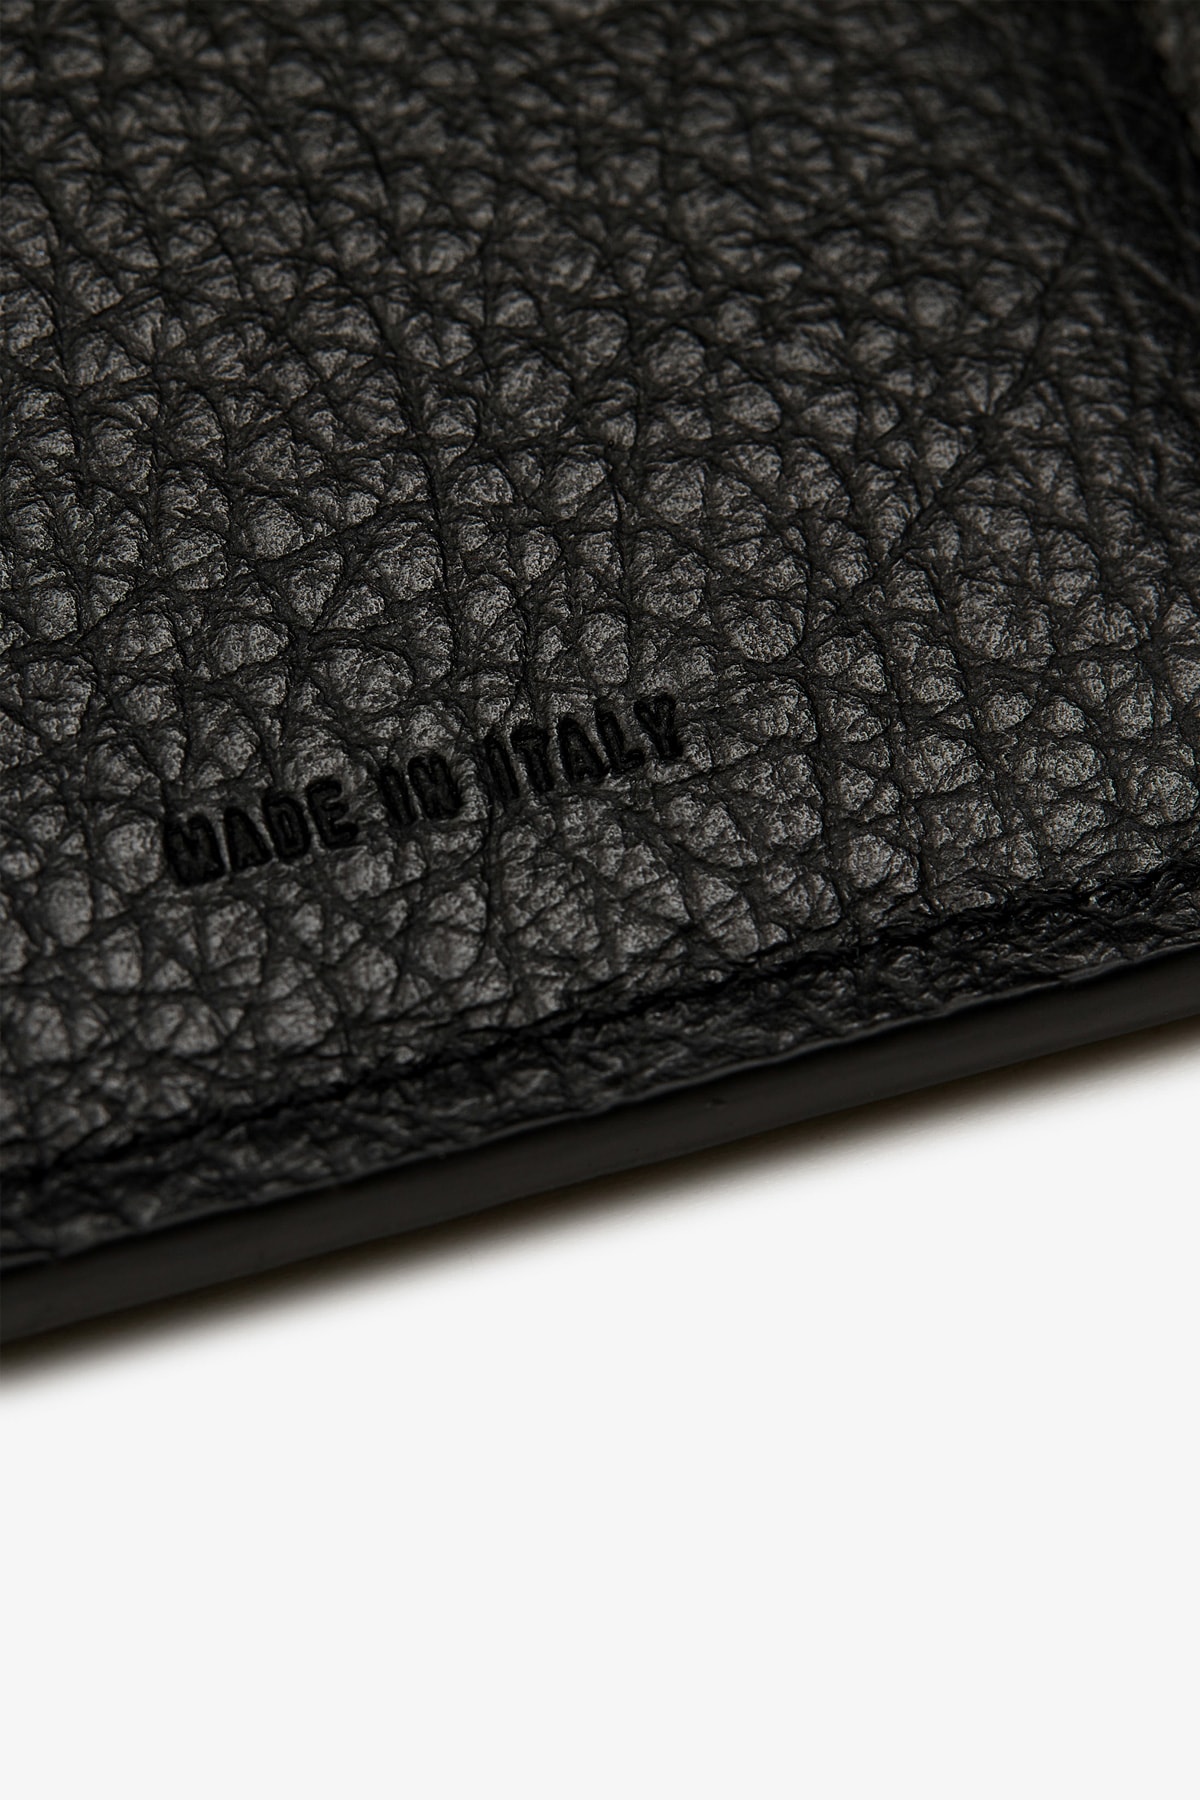 ALYX First Leather Goods & Wallet Collection | Hypebeast